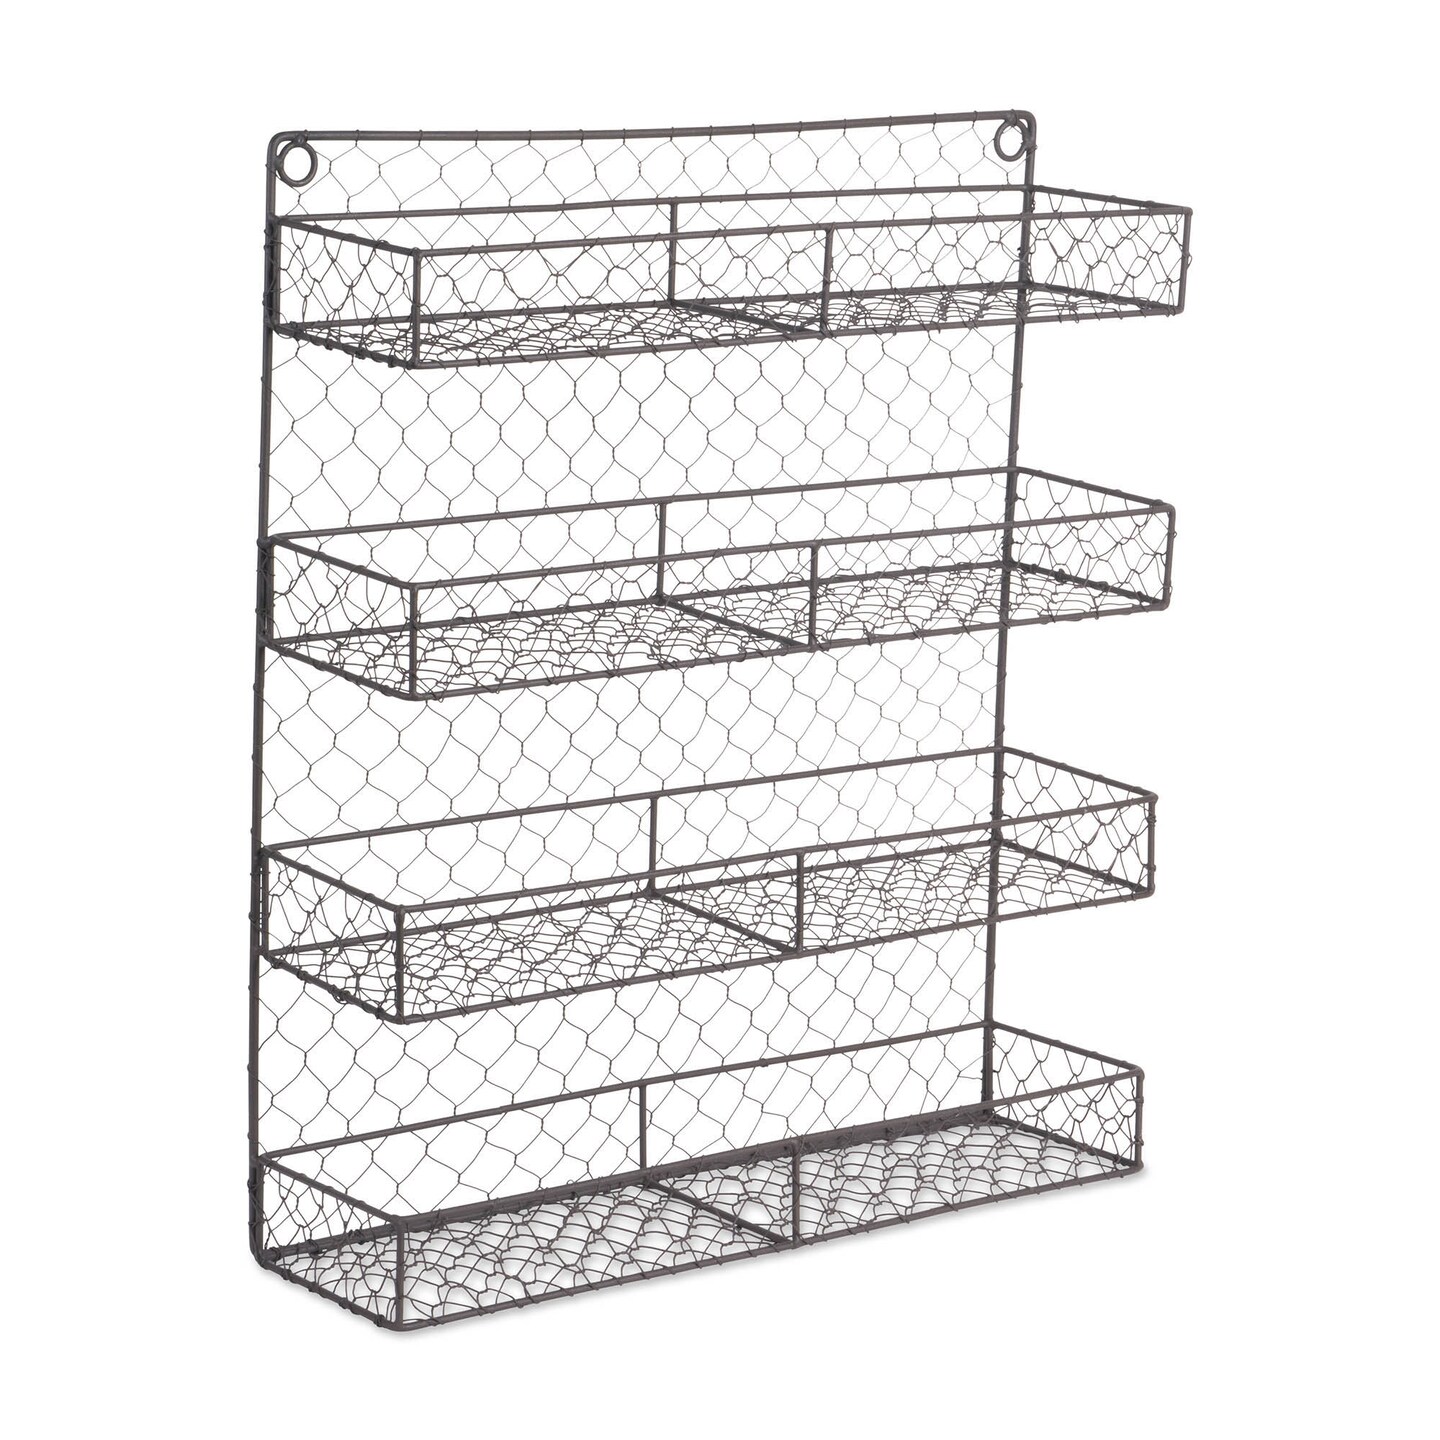 DII Double Wide 4 Row Chicken Wire Spice Rack | Michaels